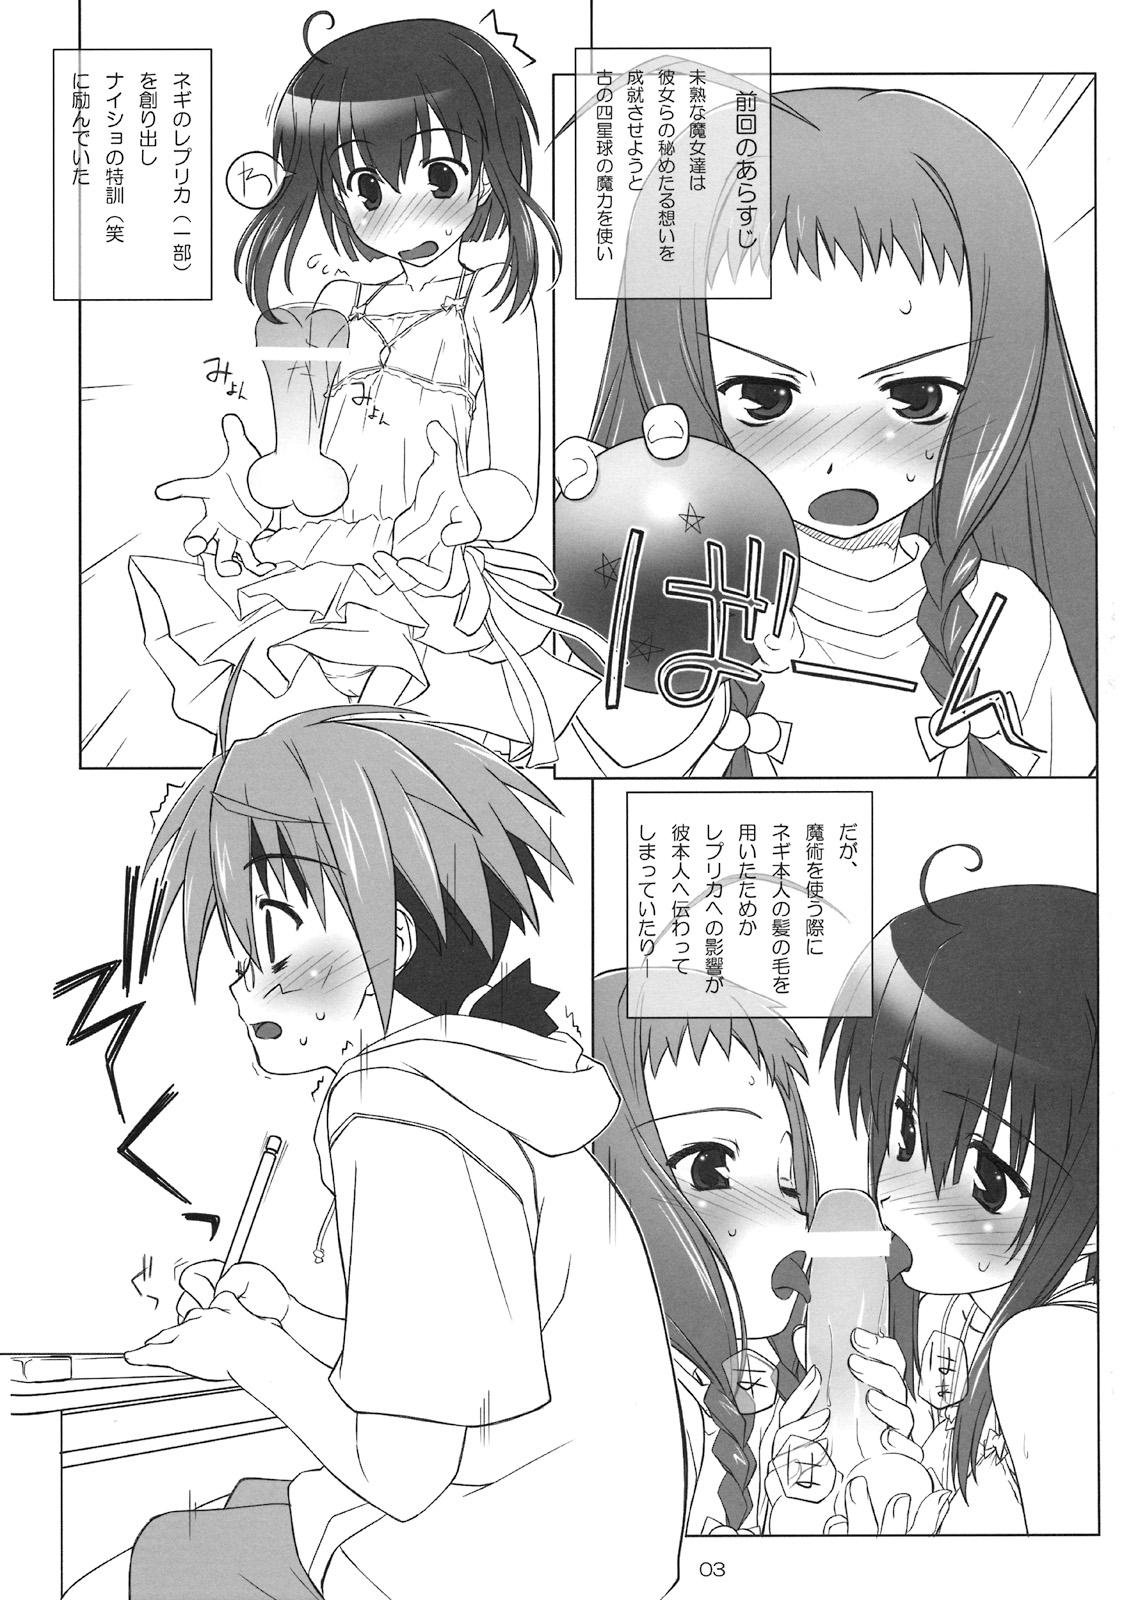 Married Dear My Little Witches 2nd - Mahou sensei negima Free Blowjob - Page 2